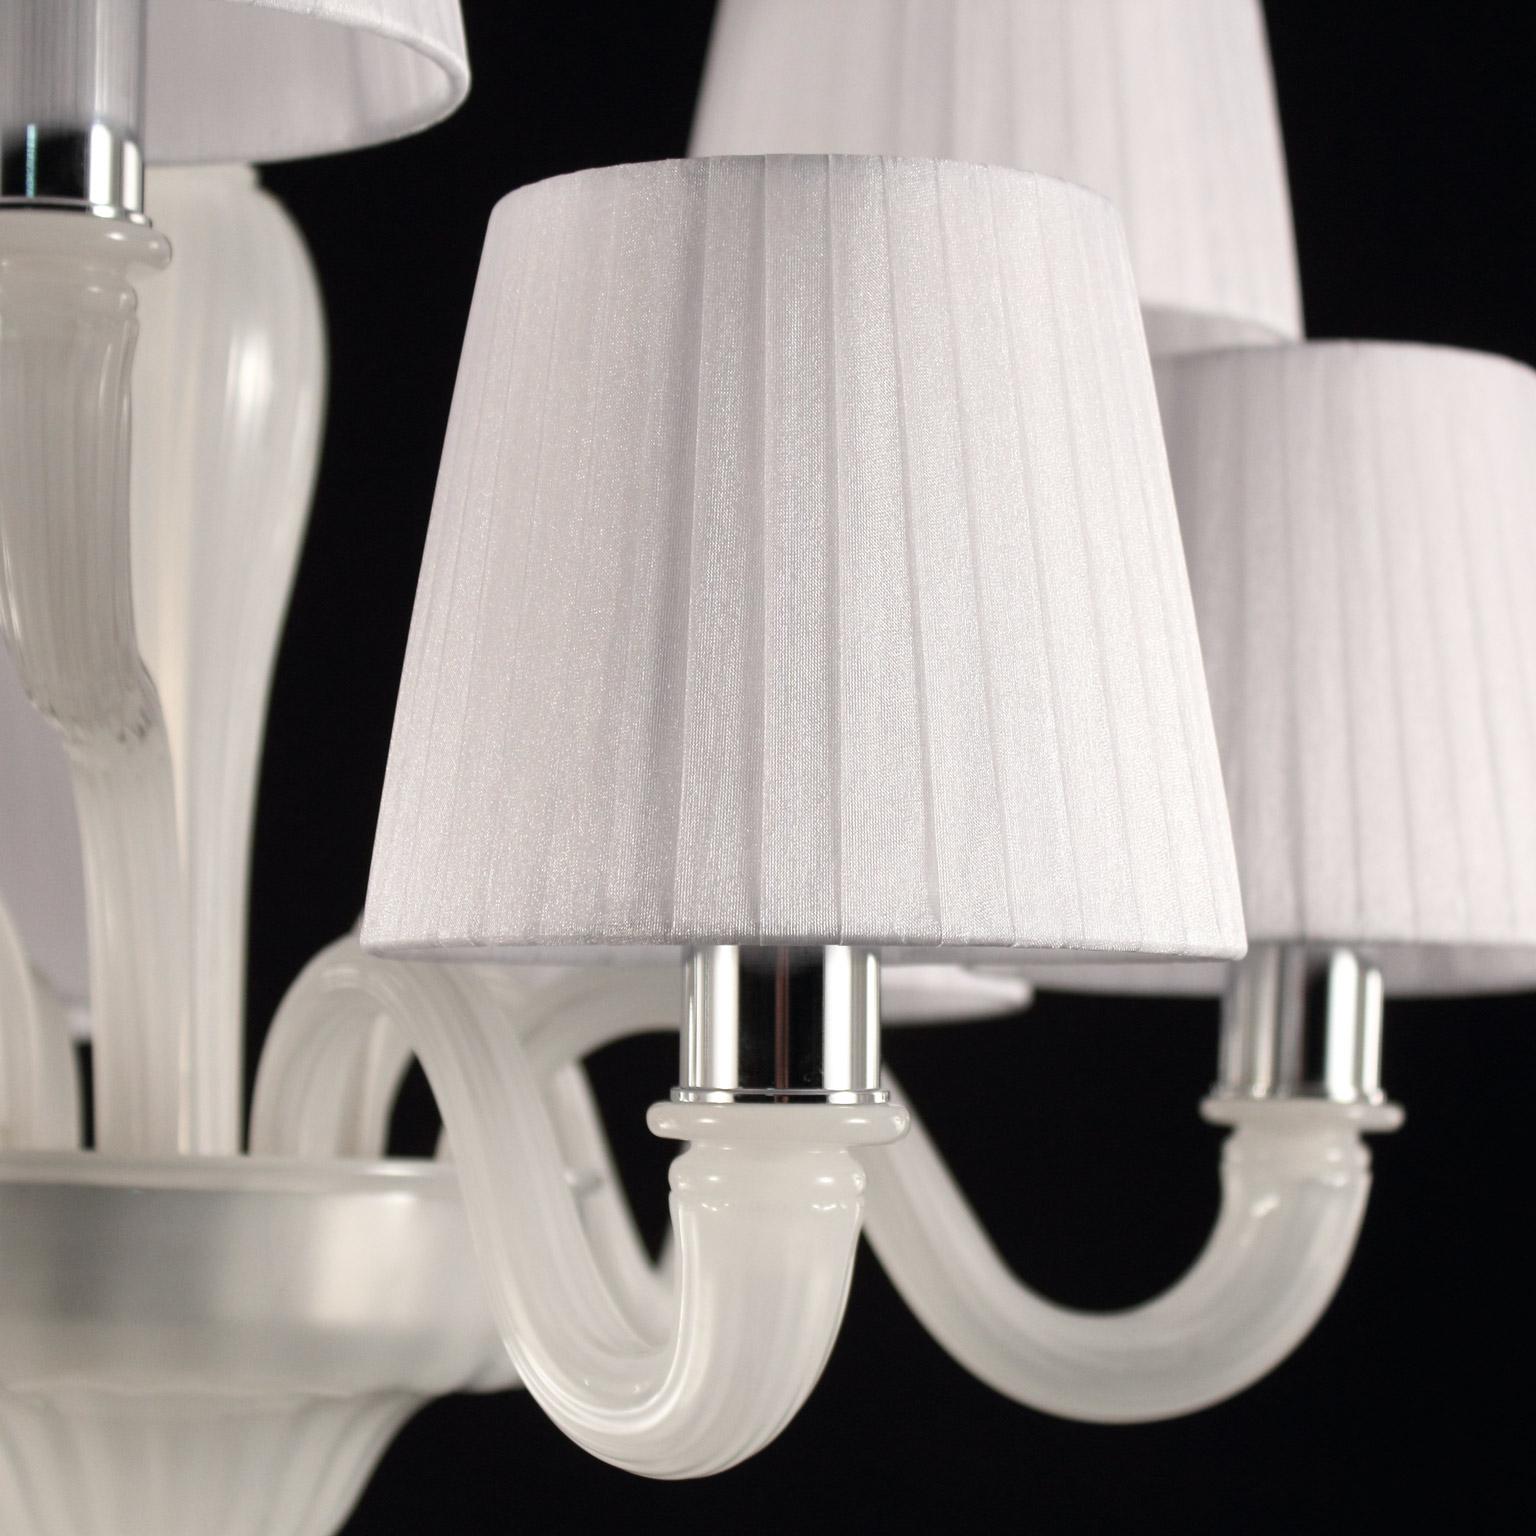 Chapeau chandelier 6+3-light artistic silk Murano glass, white organza lampshades by Multiforme
Chapeau is a classic and essential chandelier, it is handcrafted using high quality materials in Murano Glass and handmade cotton lampshades.
This Murano